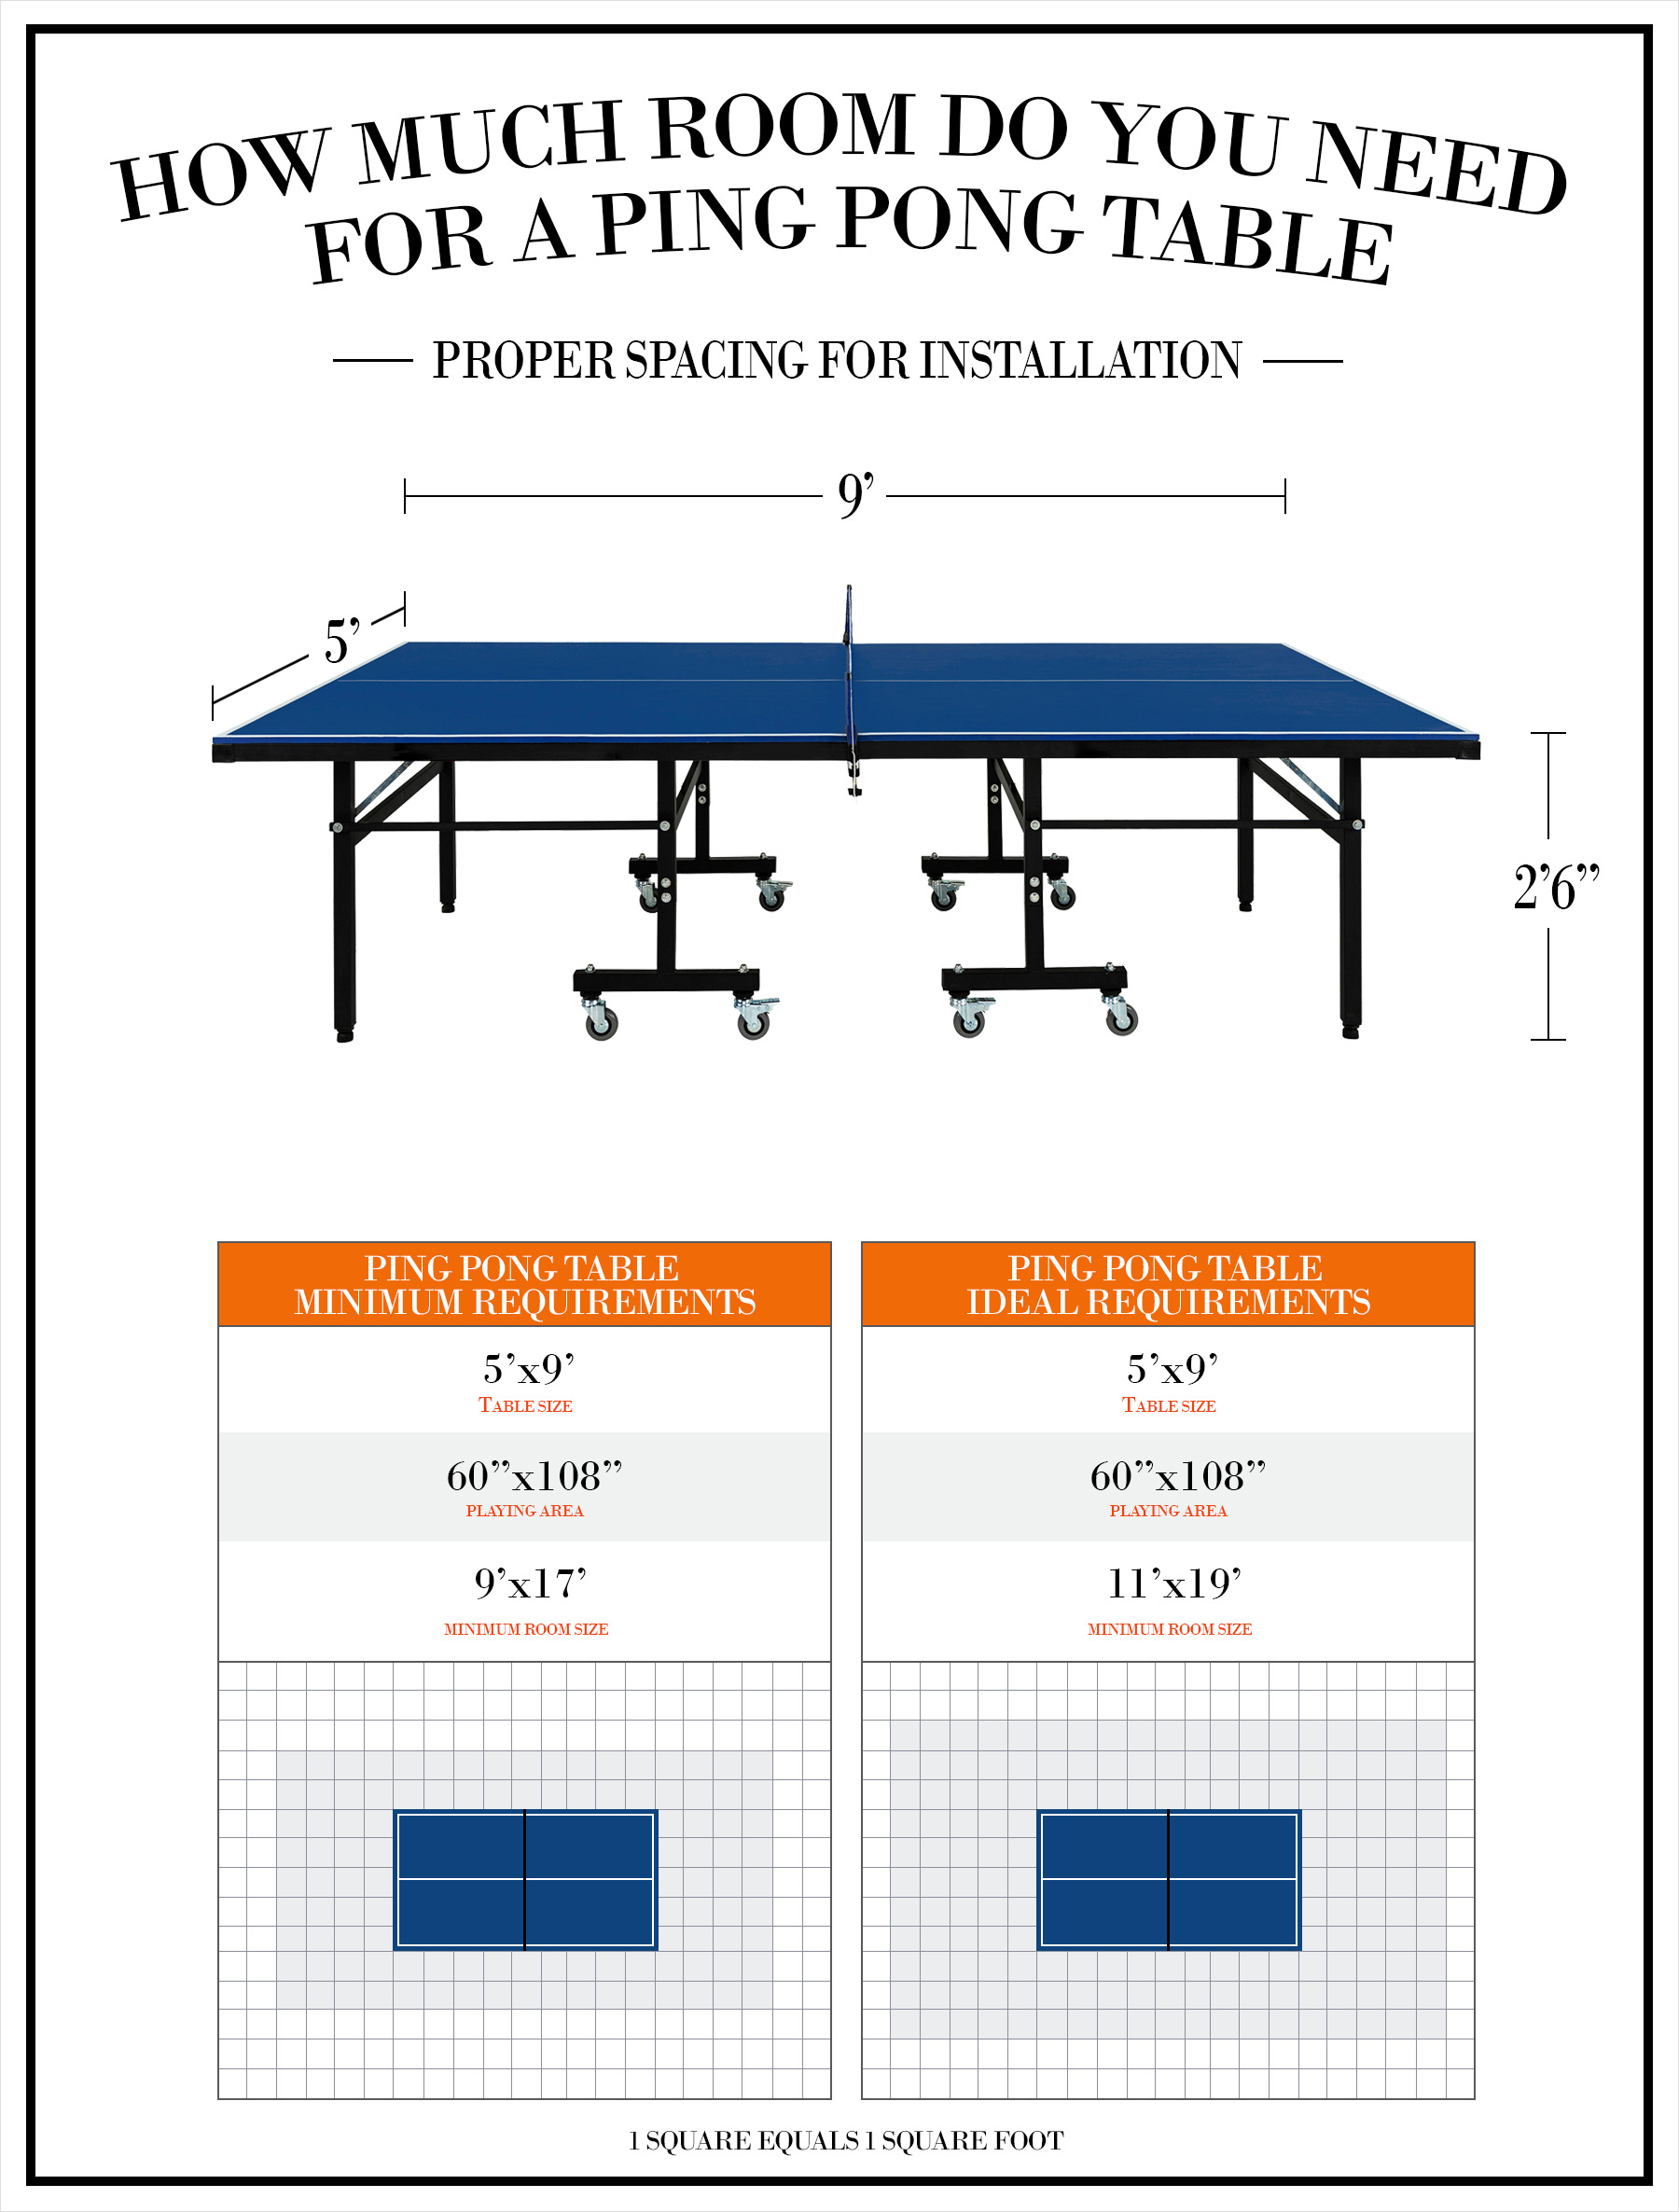 how much room do you need for a ping pong table infographic 1